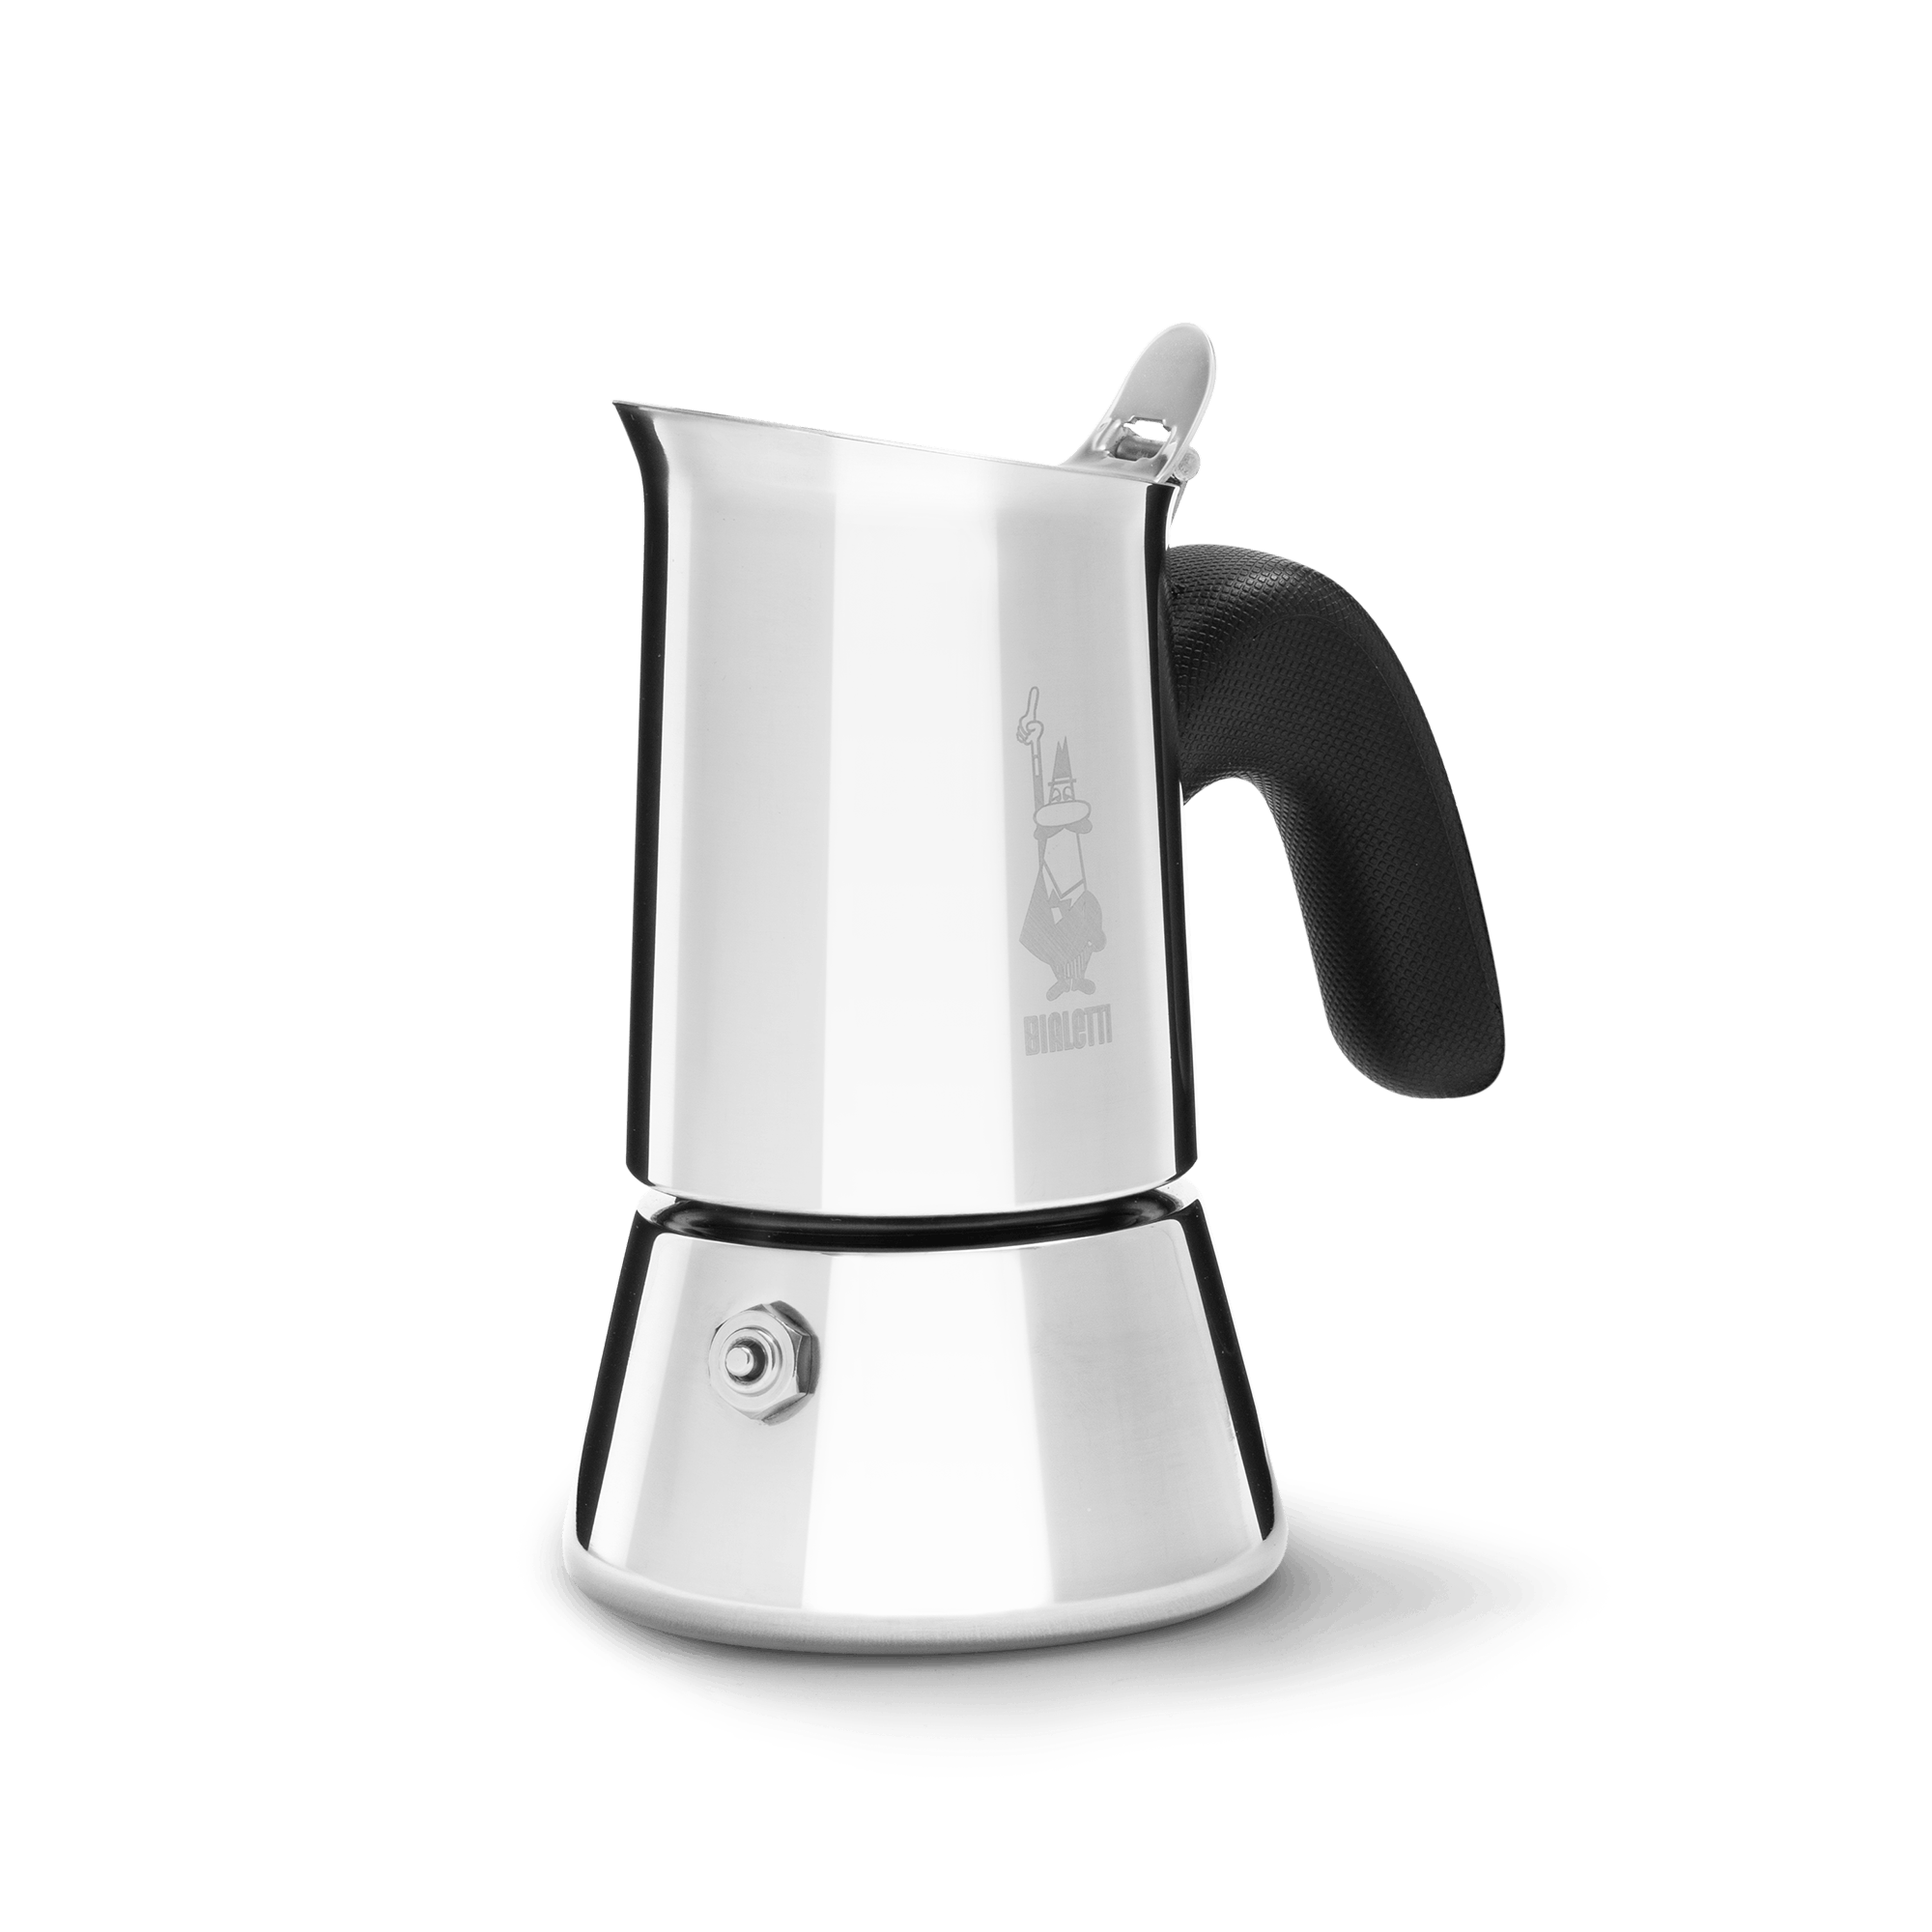 Bialetti 4 cup Stainless Steel Espresso Maker - Whisk